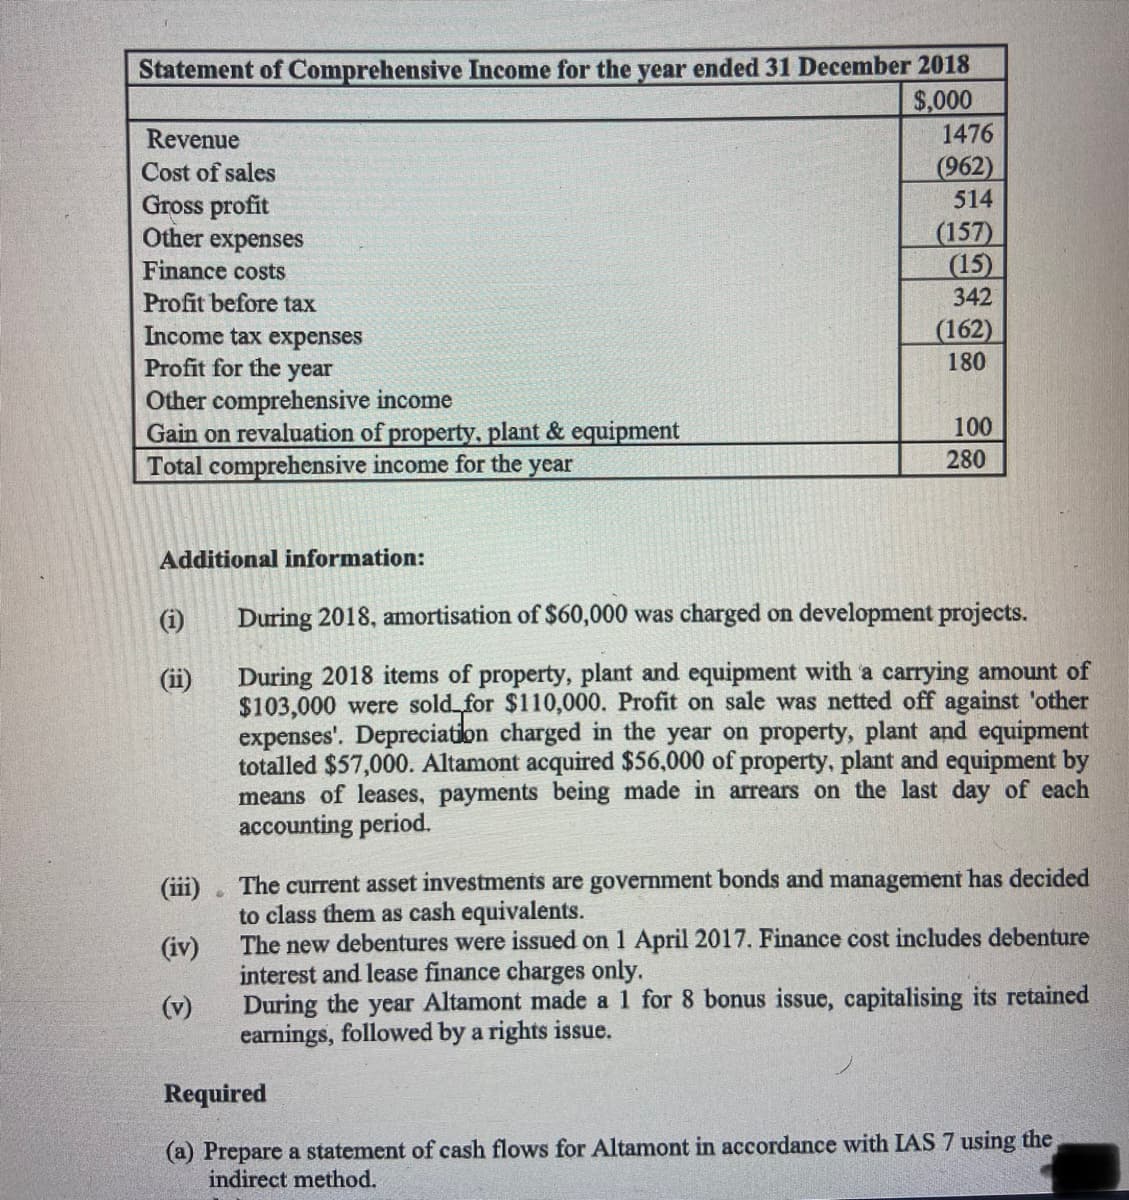 Statement of Comprehensive Income for the year ended 31 December 2018
$,000
Revenue
Cost of sales
Gross profit
Other expenses
Finance costs
Profit before tax
Income tax expenses
Profit for the
year
Other comprehensive income
Gain on revaluation of property, plant & equipment
Total comprehensive income for the year
(i)
(ii)
(iii)
(iv)
(v)
1476
(962)
514
•
(157)
(15)
342
(162)
180
Additional information:
During 2018, amortisation of $60,000 was charged on development projects.
During 2018 items of property, plant and equipment with a carrying amount of
$103,000 were sold for $110,000. Profit on sale was netted off against other
expenses'. Depreciation charged in the year on property, plant and equipment
totalled $57,000. Altamont acquired $56,000 of property, plant and equipment by
means of leases, payments being made in arrears on the last day of each
accounting period.
100
280
The current asset investments are government bonds and management has decided
to class them as cash equivalents.
The new debentures were issued on 1 April 2017. Finance cost includes debenture
interest and lease finance charges only.
During the year Altamont made a 1 for 8 bonus issue, capitalising its retained
earnings, followed by a rights issue.
Required
(a) Prepare a statement of cash flows for Altamont in accordance with IAS 7 using the
indirect method.